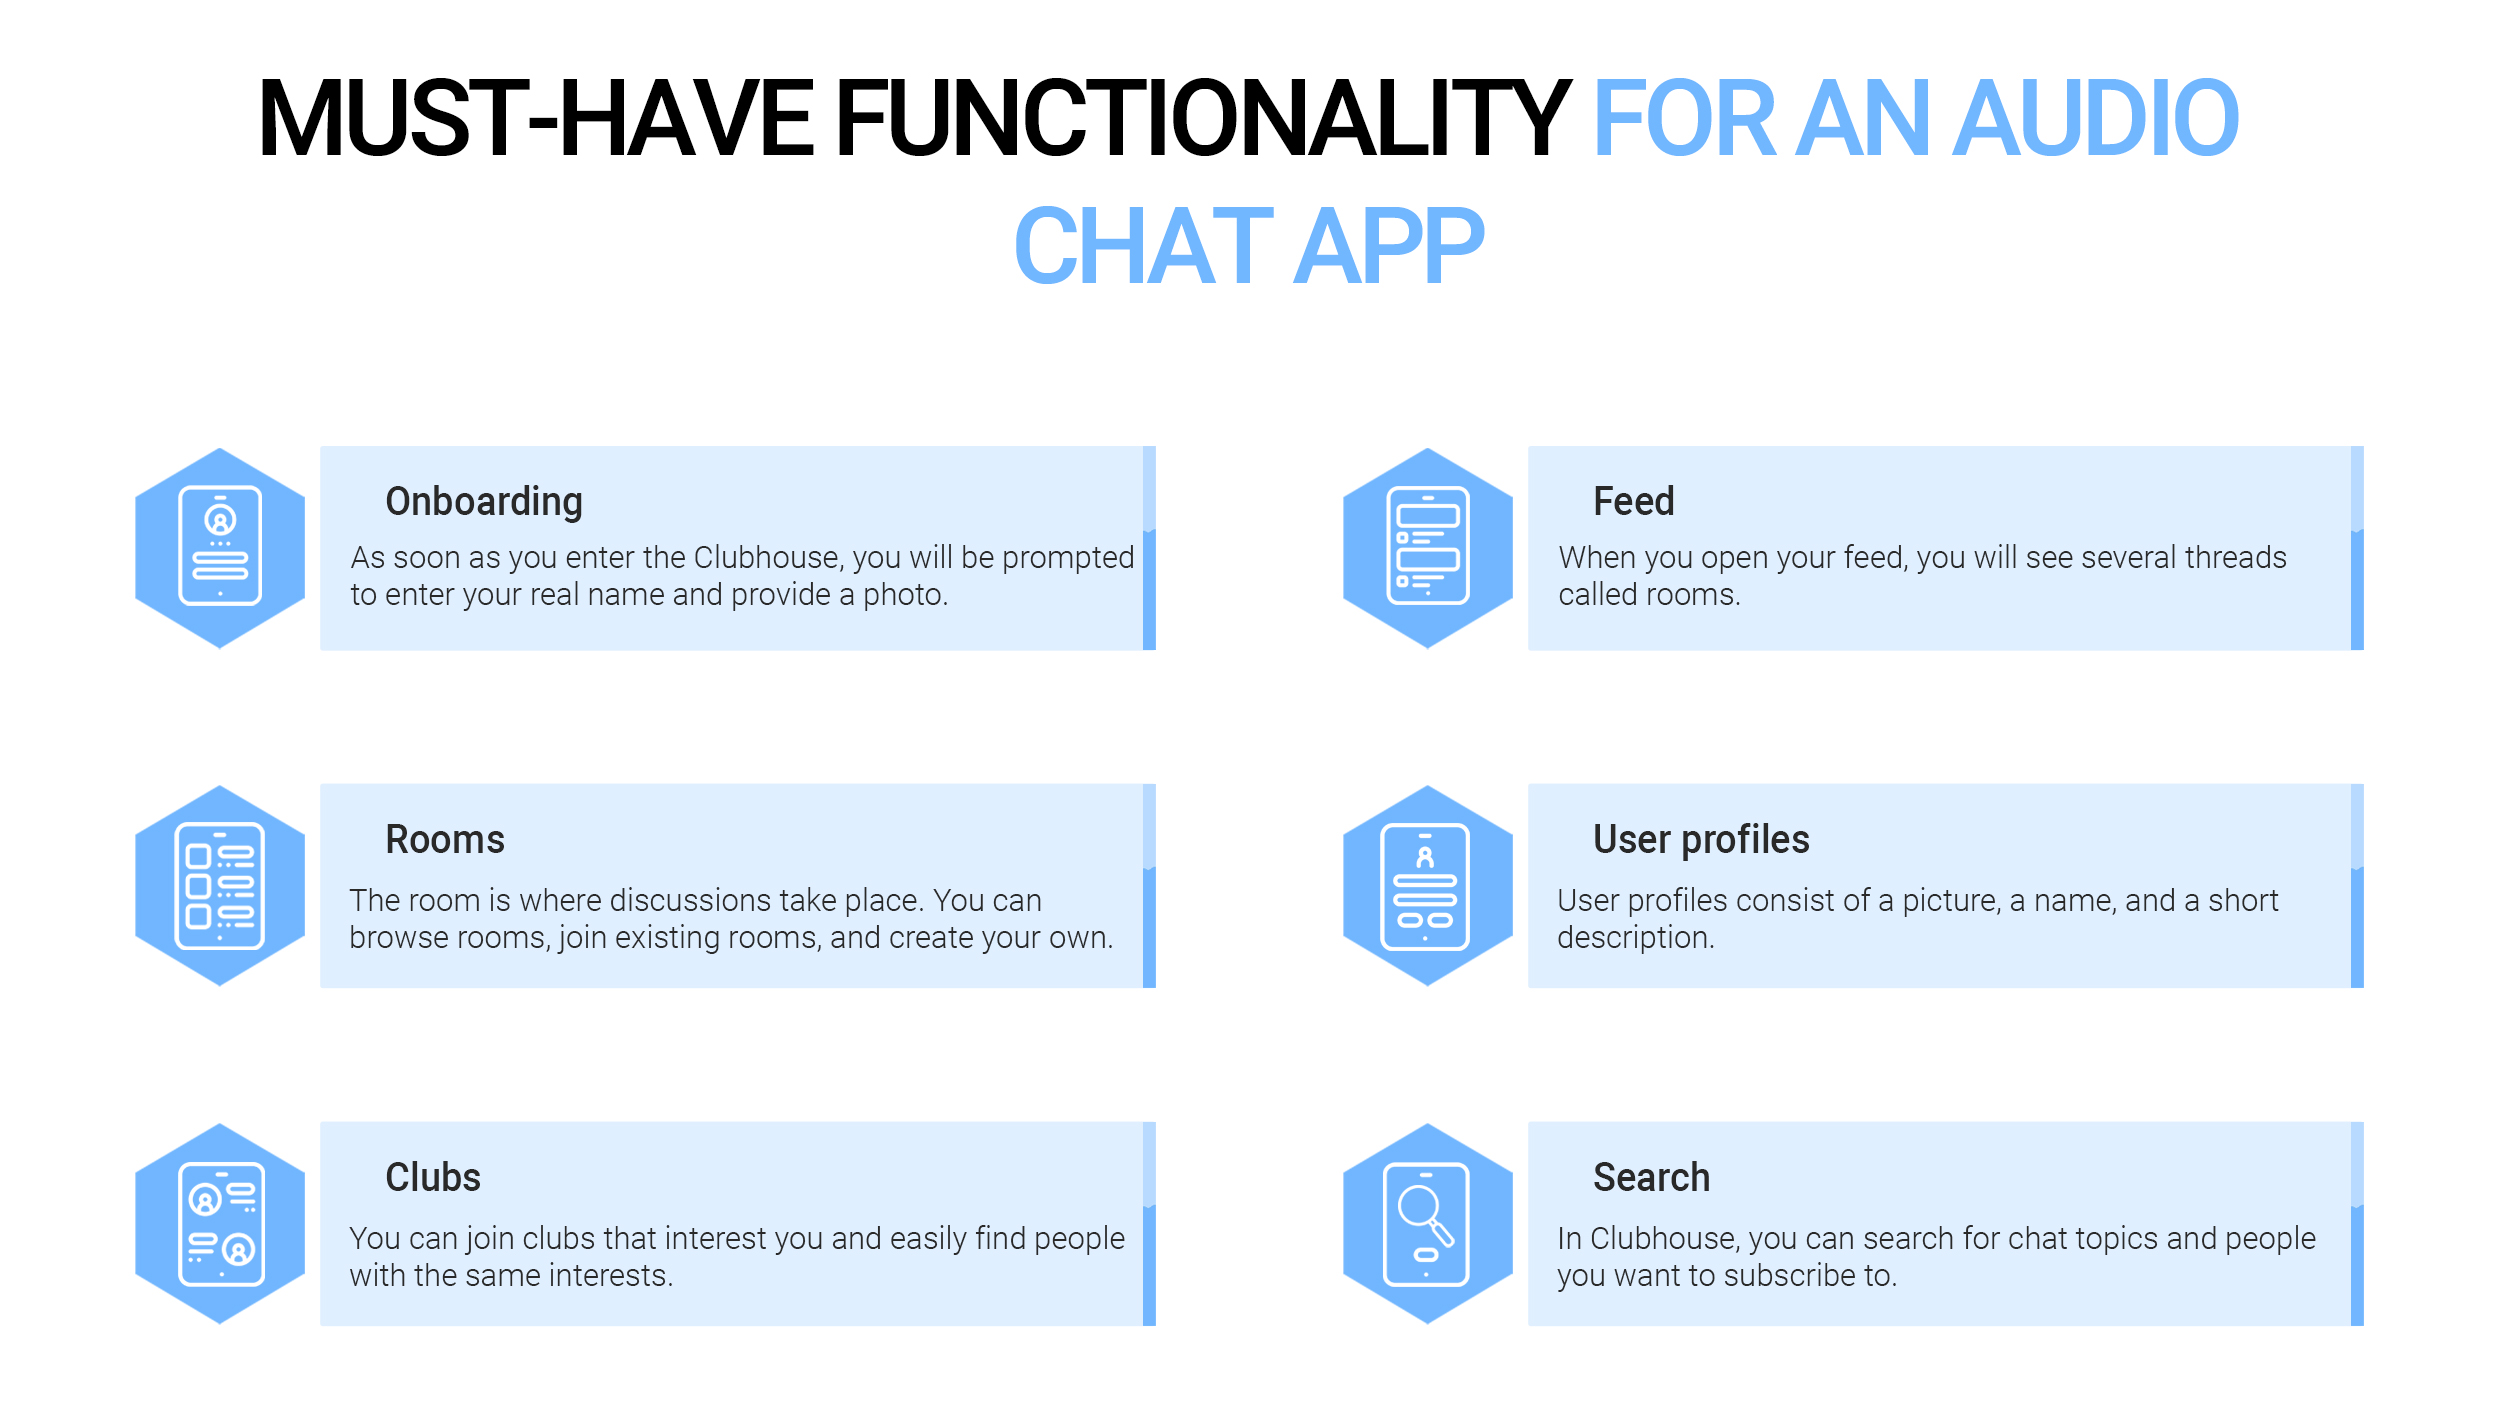 Must have functionality for an audio chat app